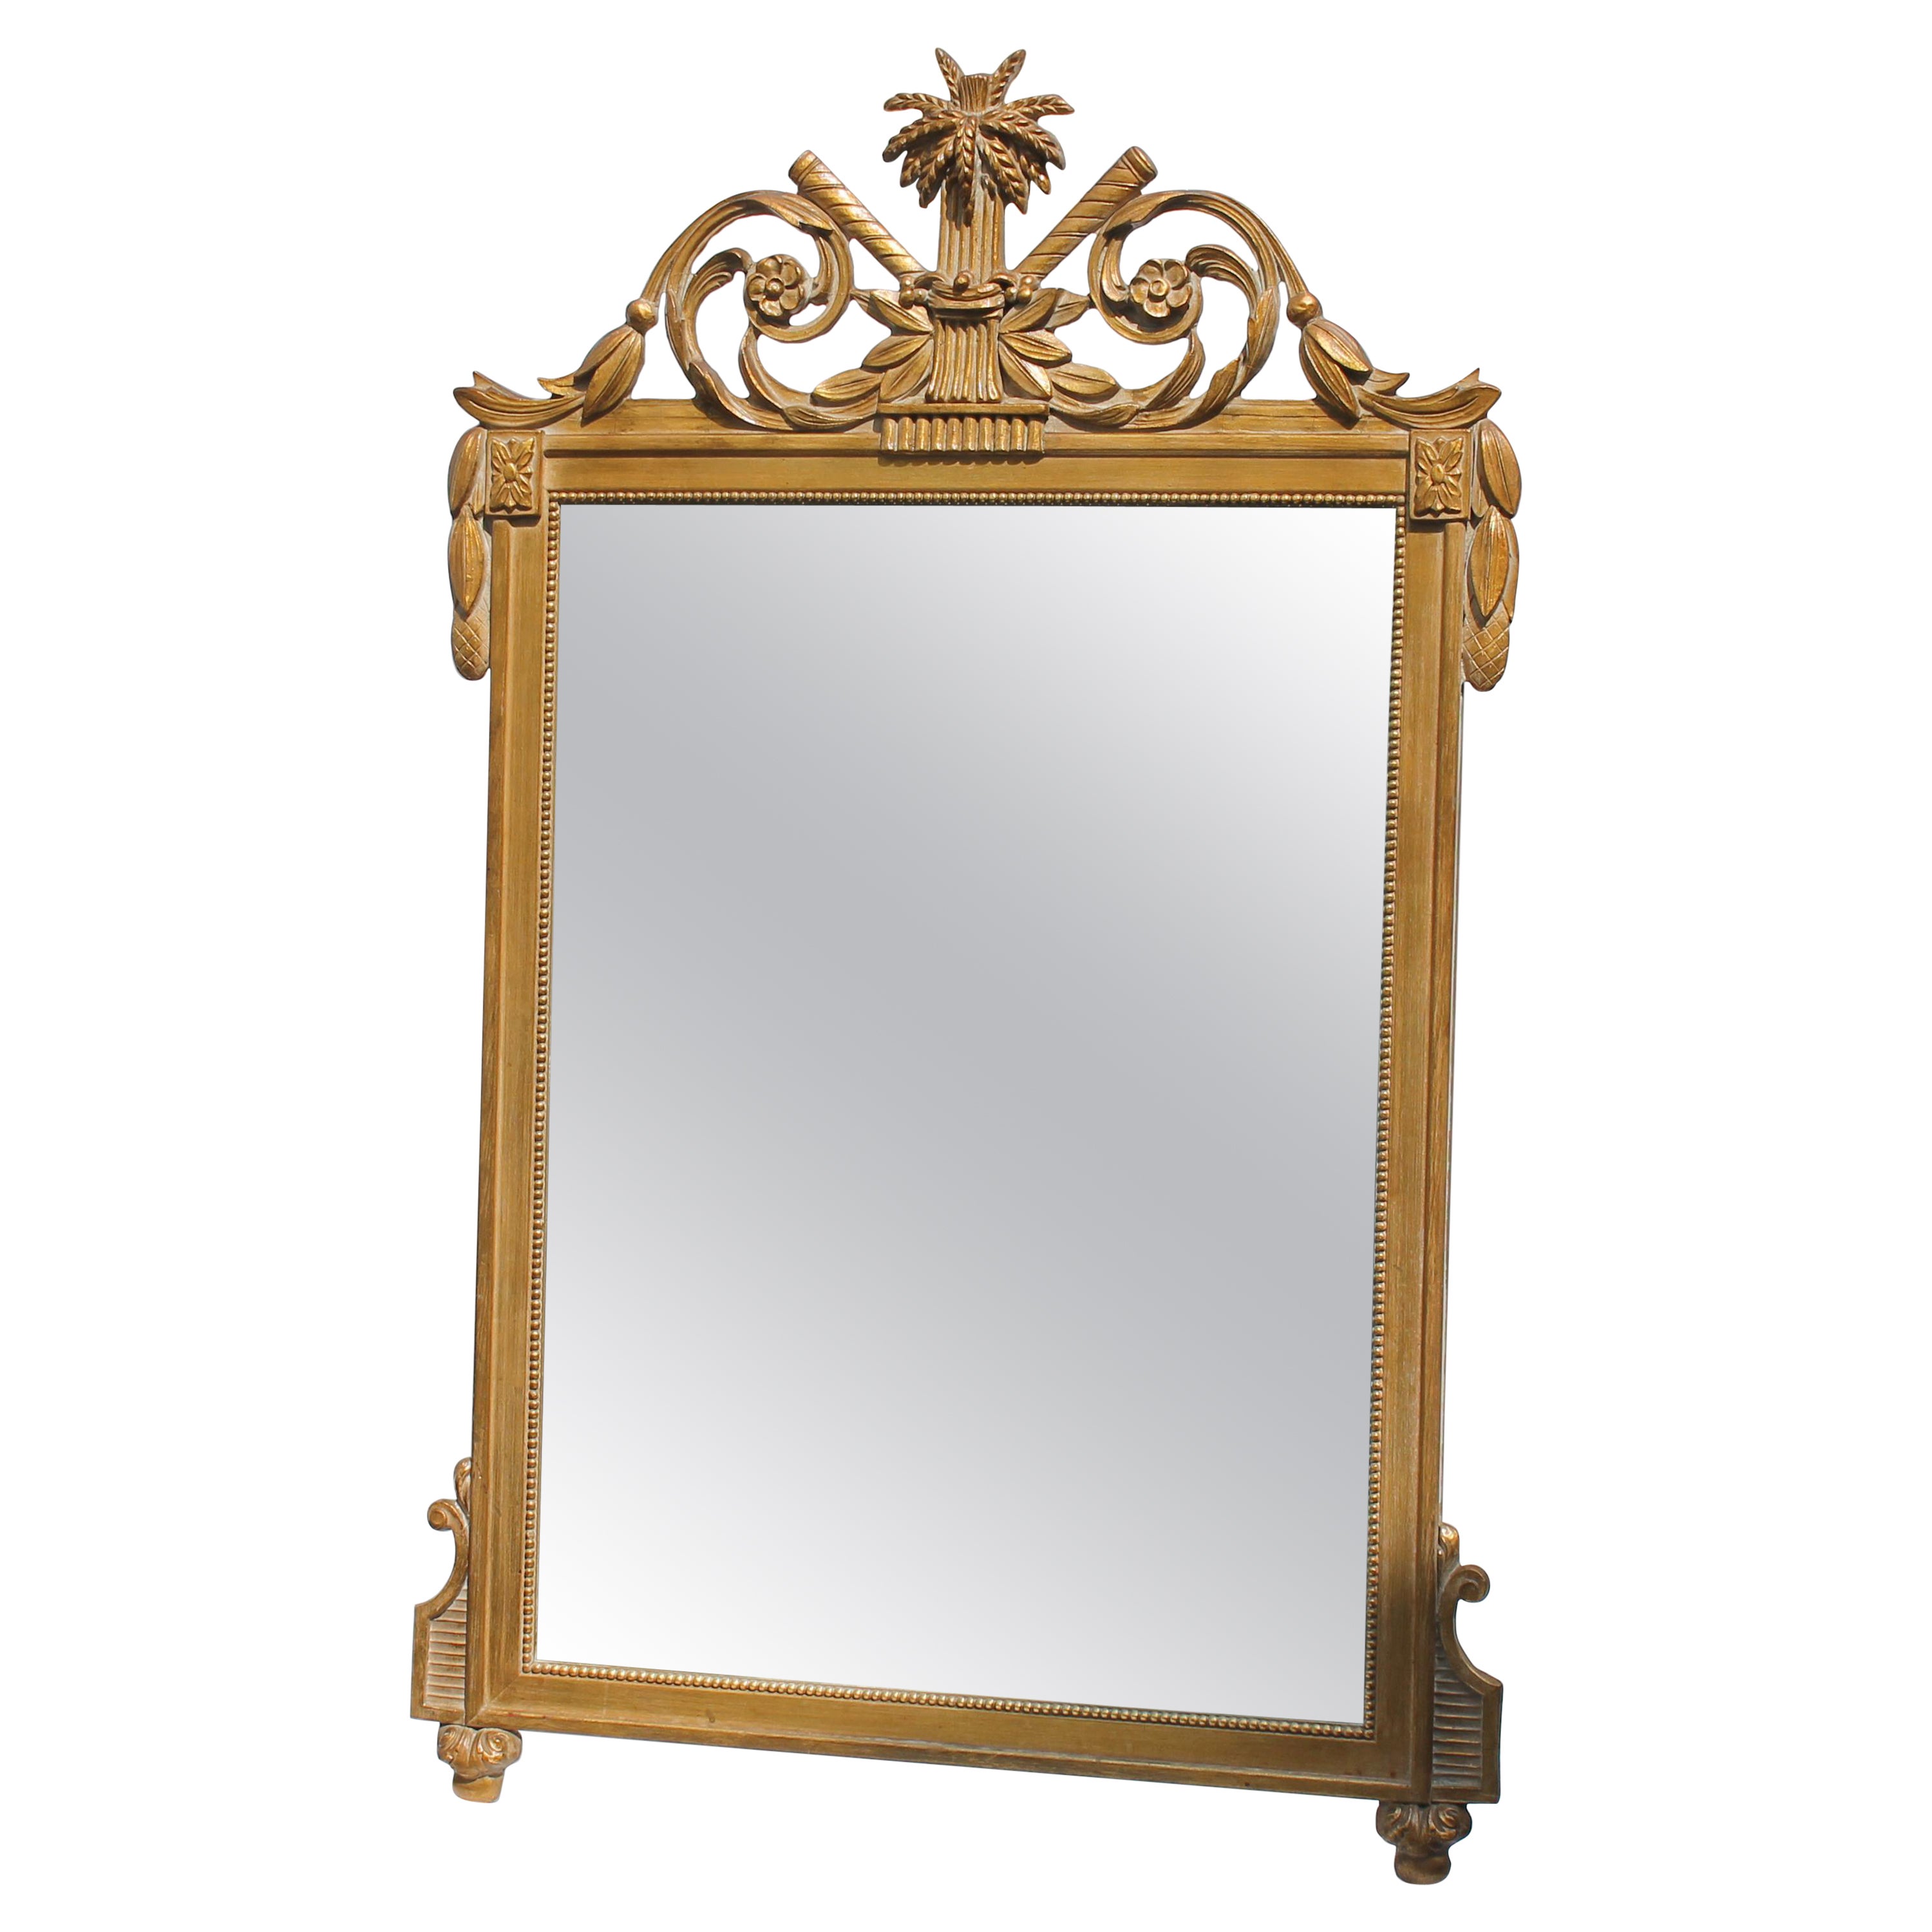 1940's Traditional style Carved Giltwood / Gesso Wall Mirror